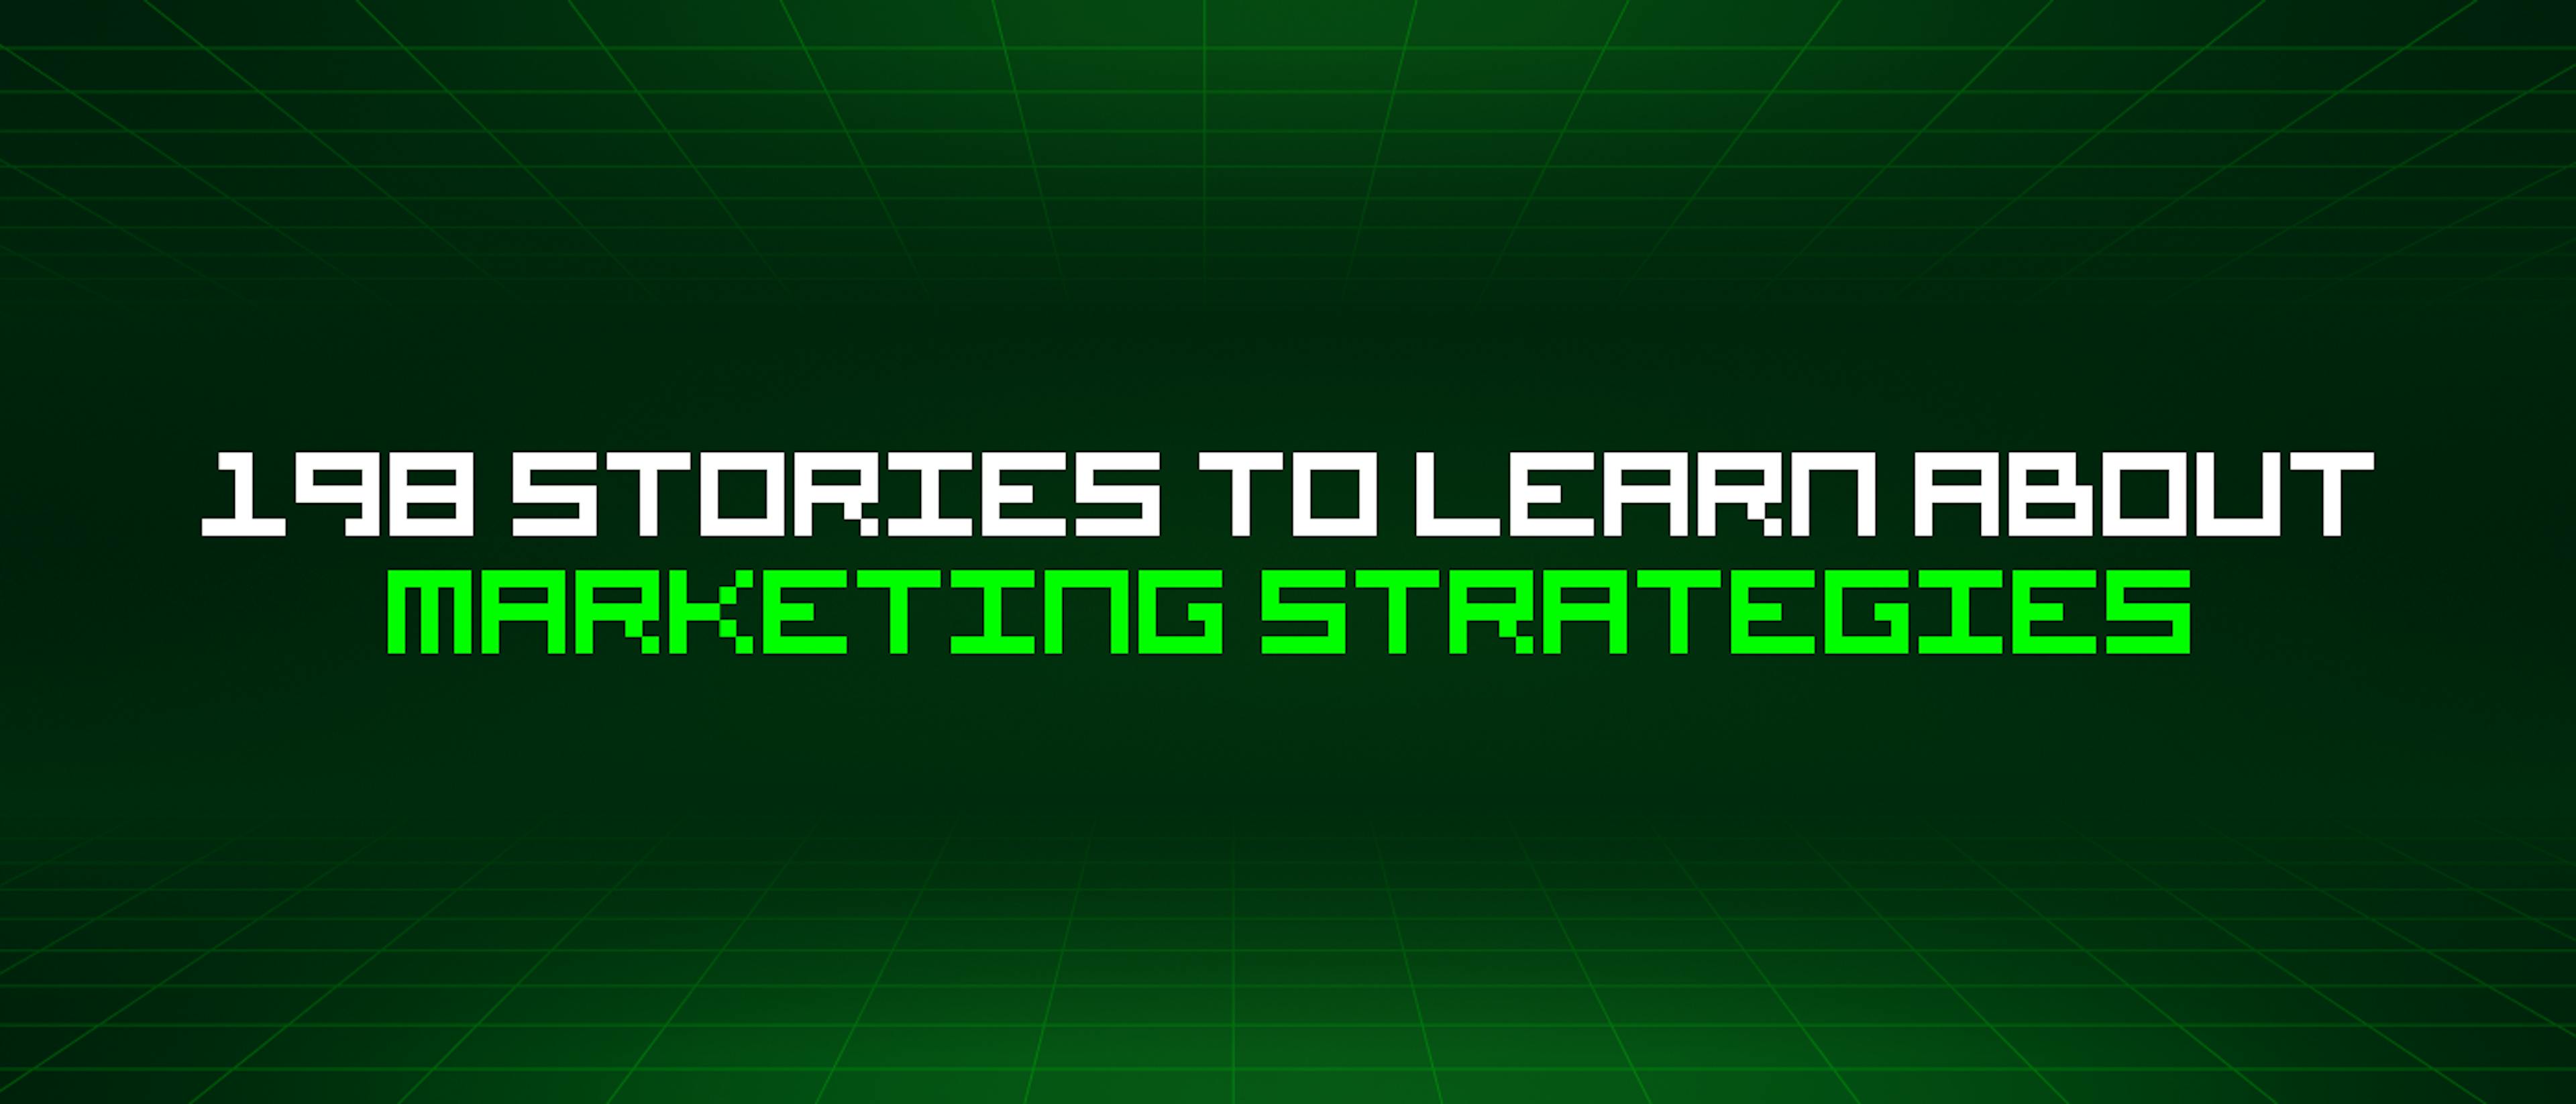 /198-stories-to-learn-about-marketing-strategies feature image